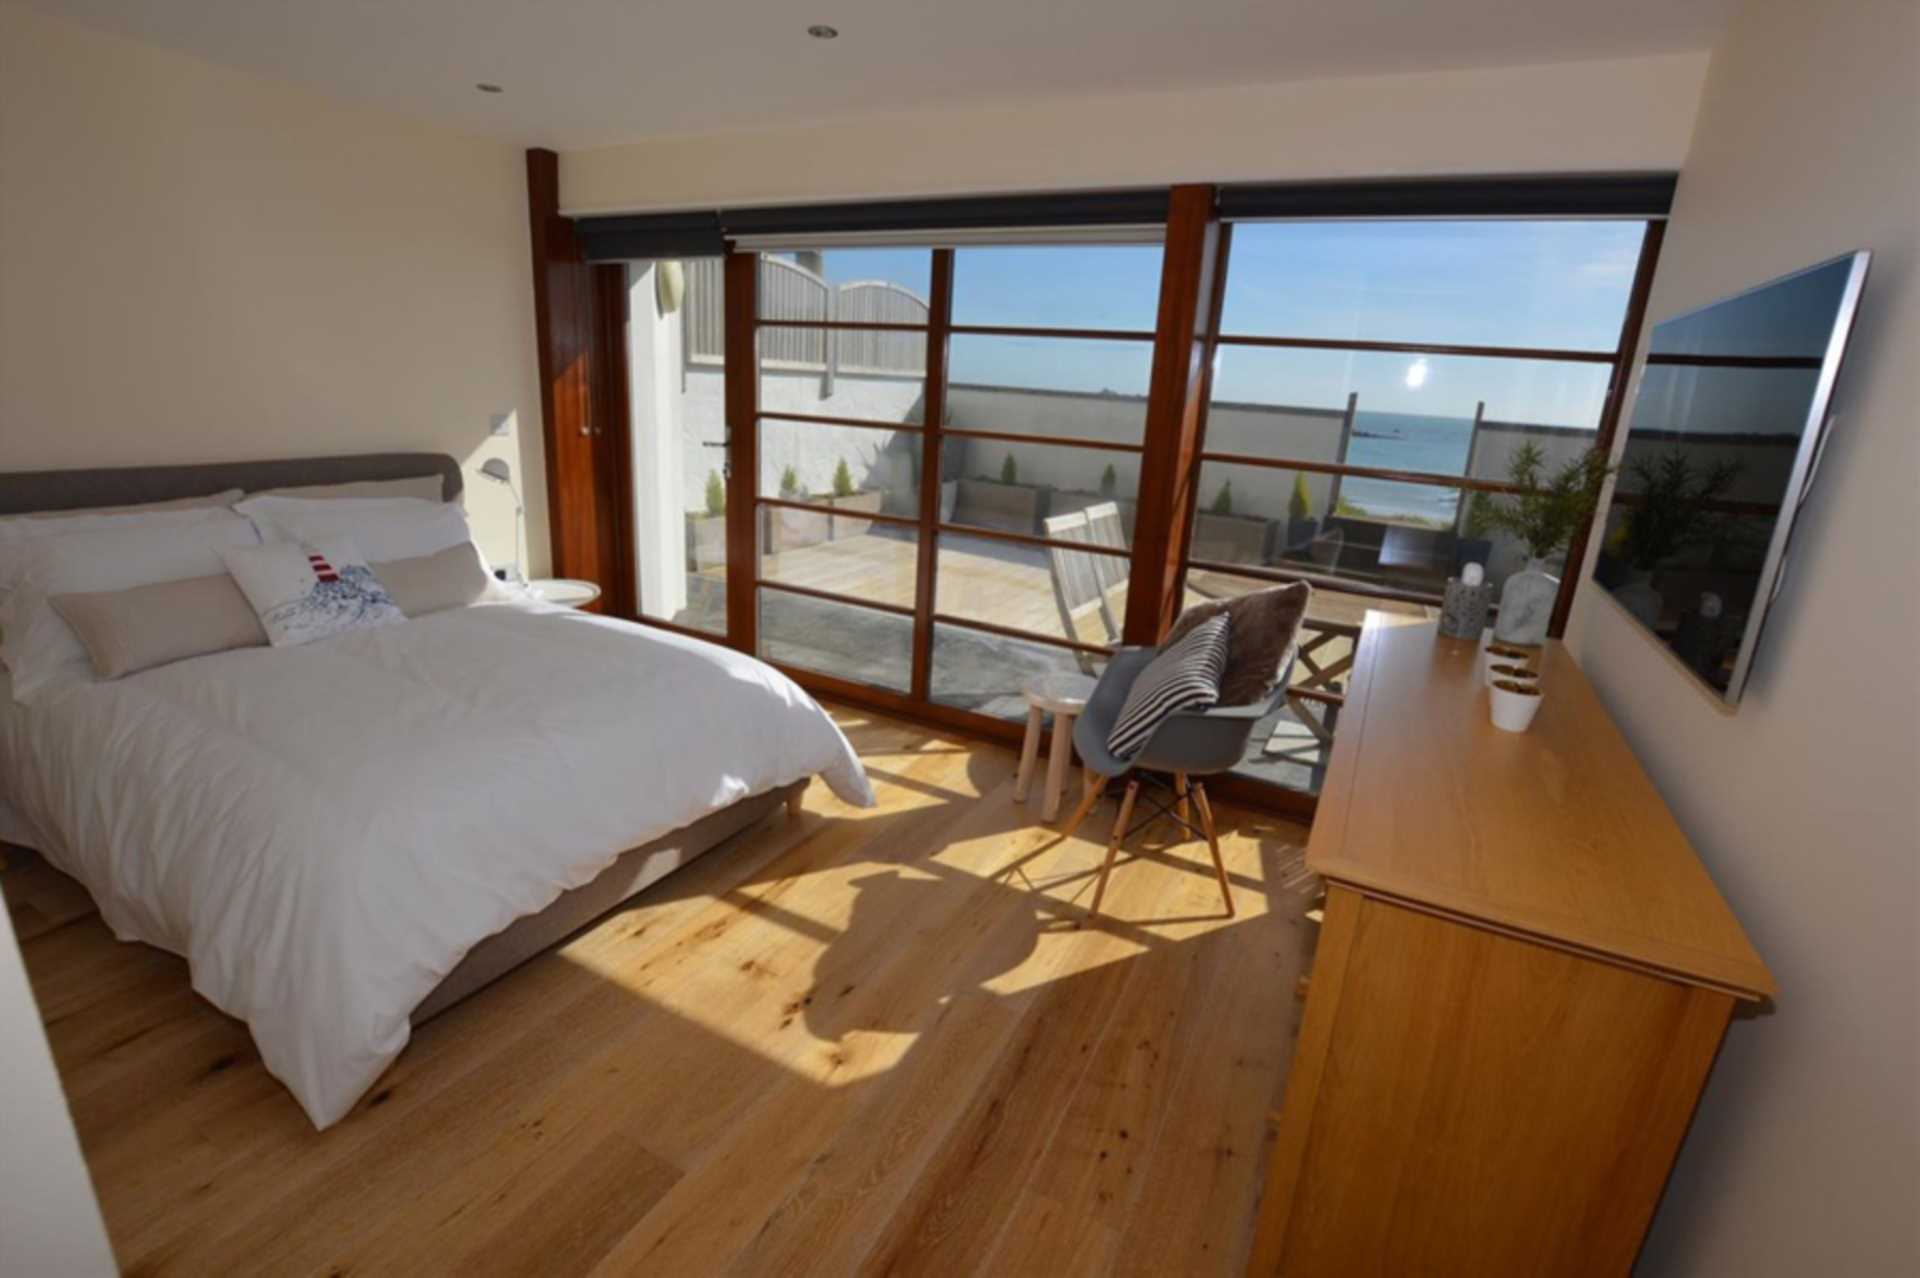 STUNNING 3 BEDROOM BEACH HOUSE TO RENT FROM JUNE JUST IN TIME FOR SUMMER ON THE BEACH, Image 8